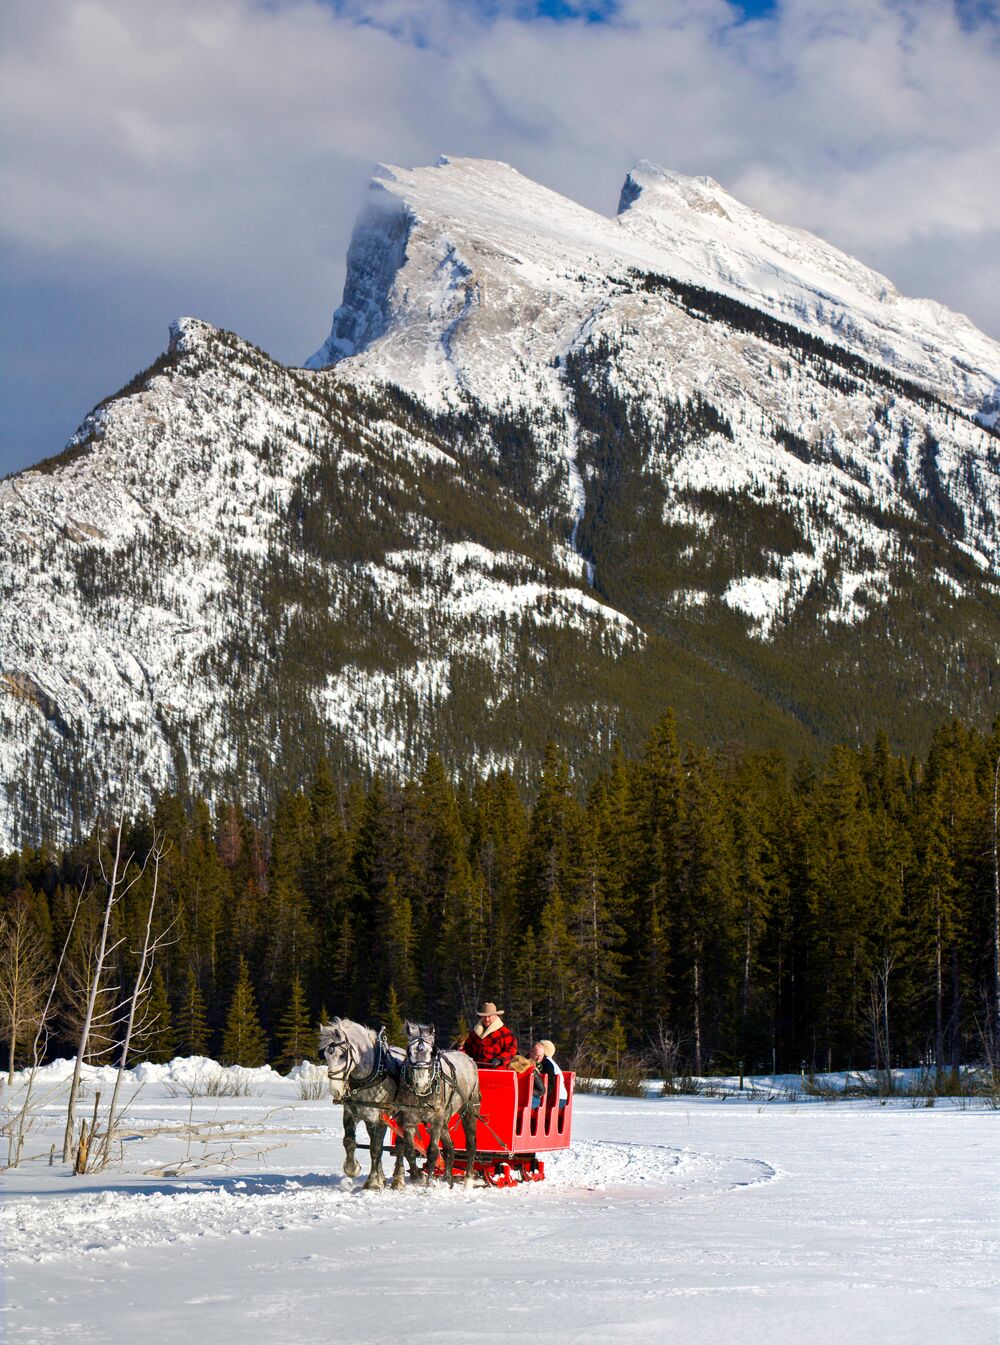 A red horse drawn sleigh pulls people along in the shadow of Mount Rundle in Banff National Park.